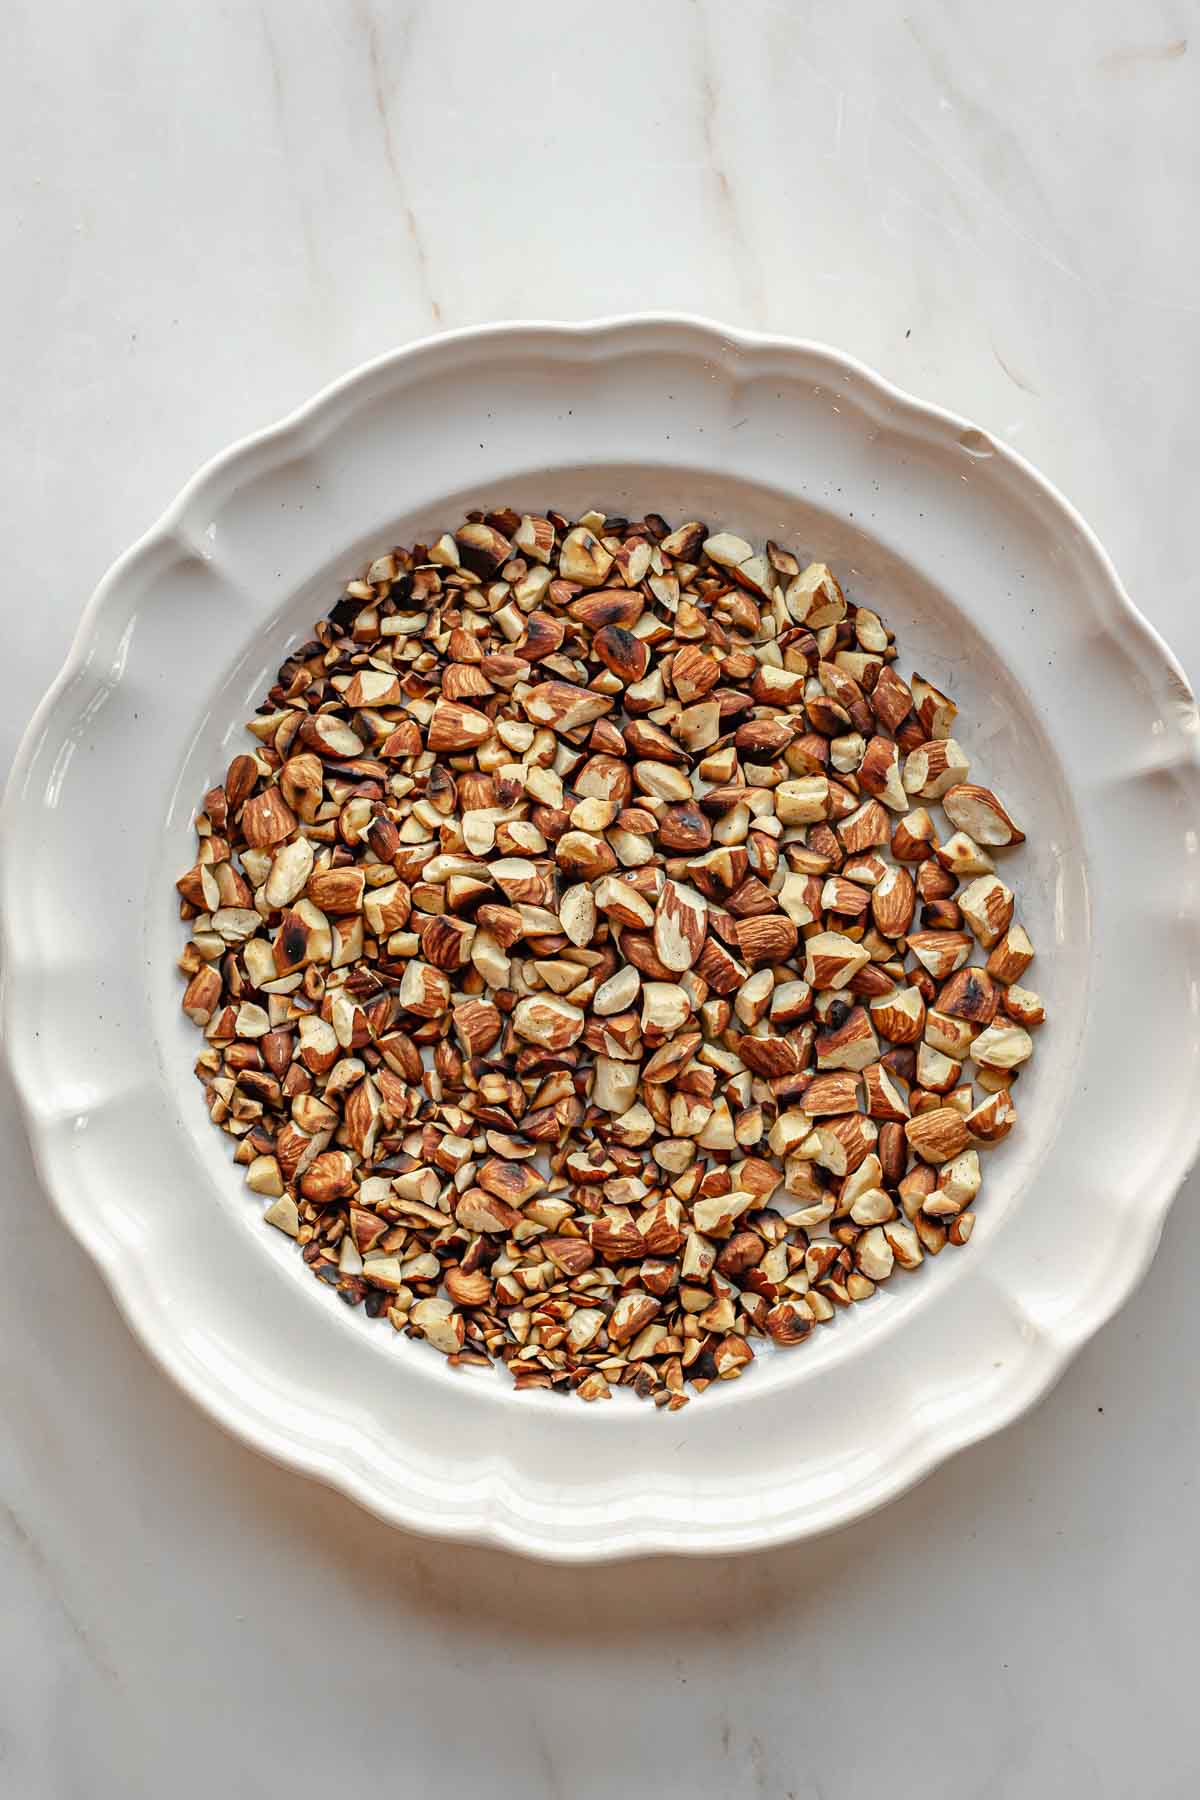 Toasted chopped almonds on a plate.